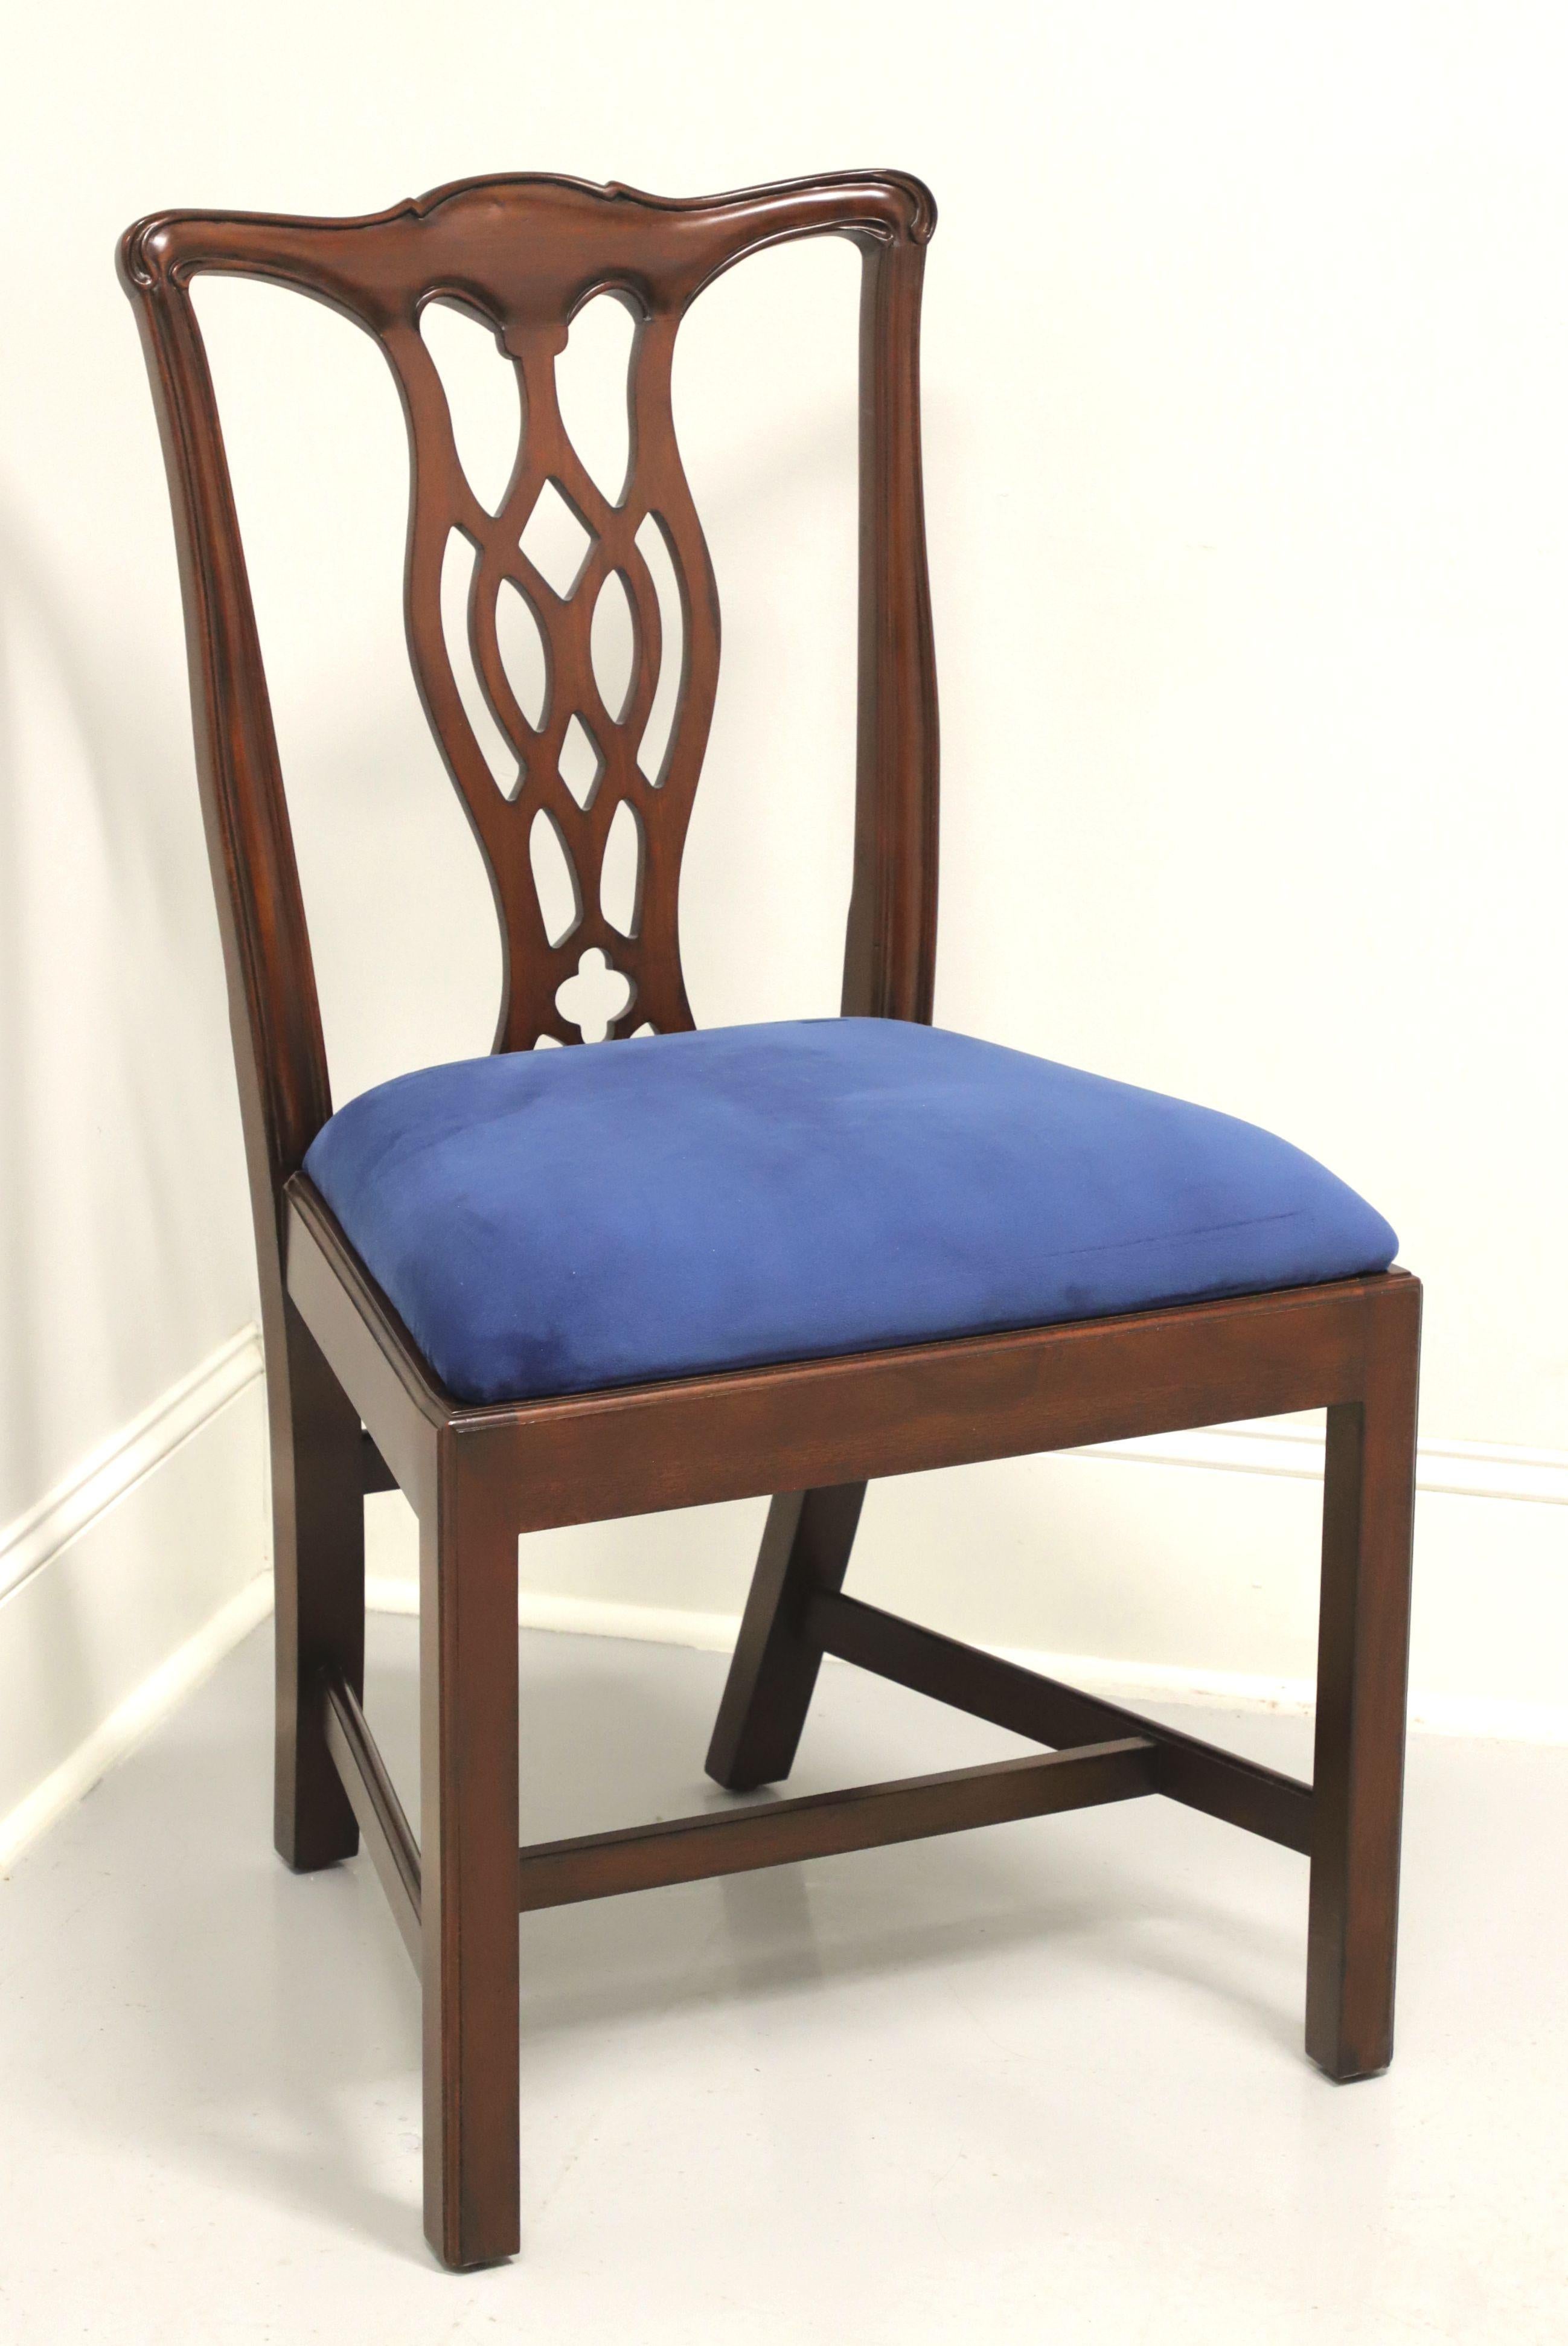 HICKORY CHAIR Mahogany Chippendale Straight Leg Dining Side Chair - A 1